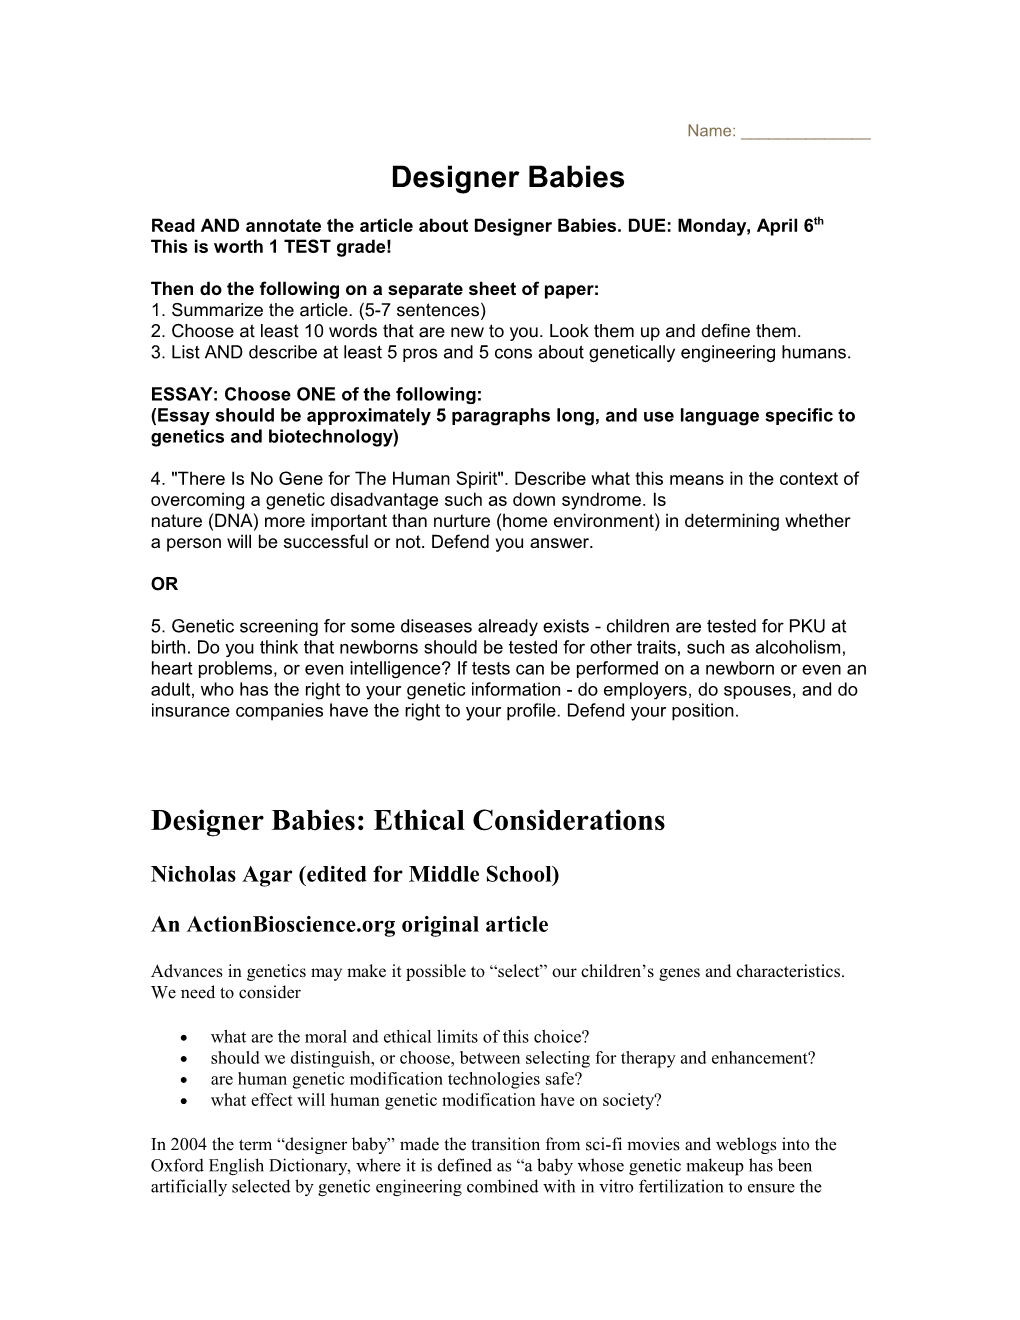 Designer Babies: Ethical Considerations